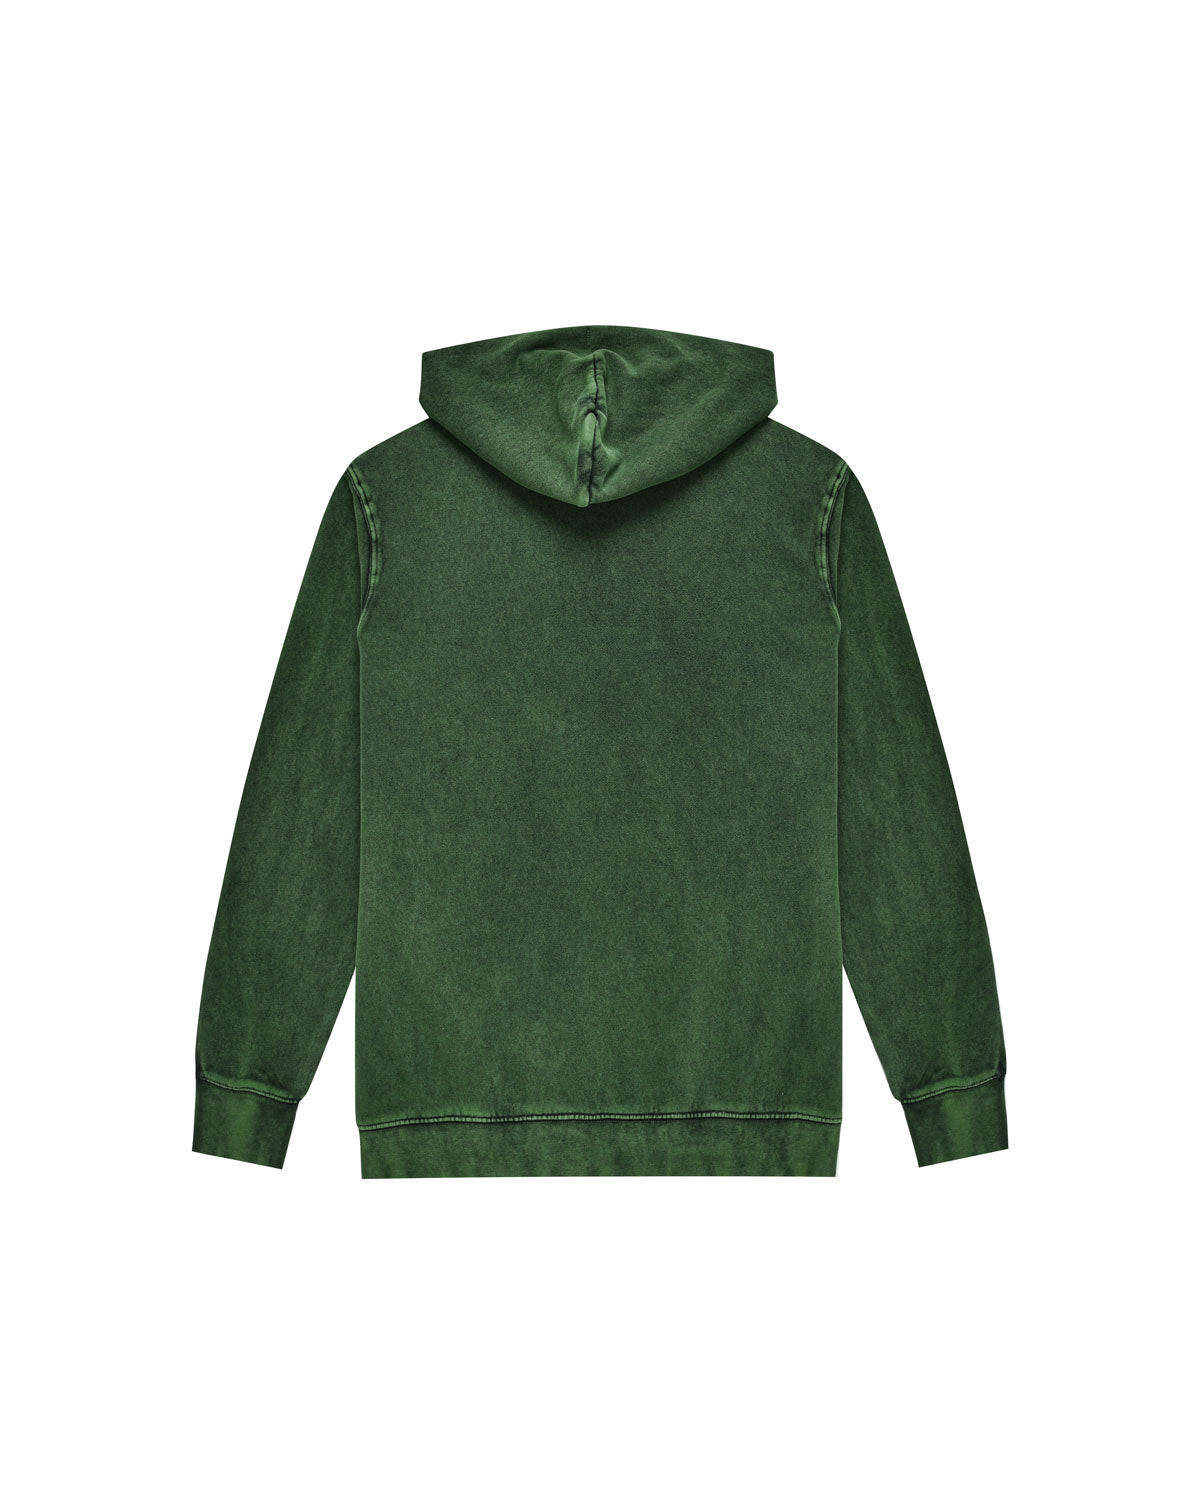 Man | Green washed effect sweatshirt with hood in 100% cotton